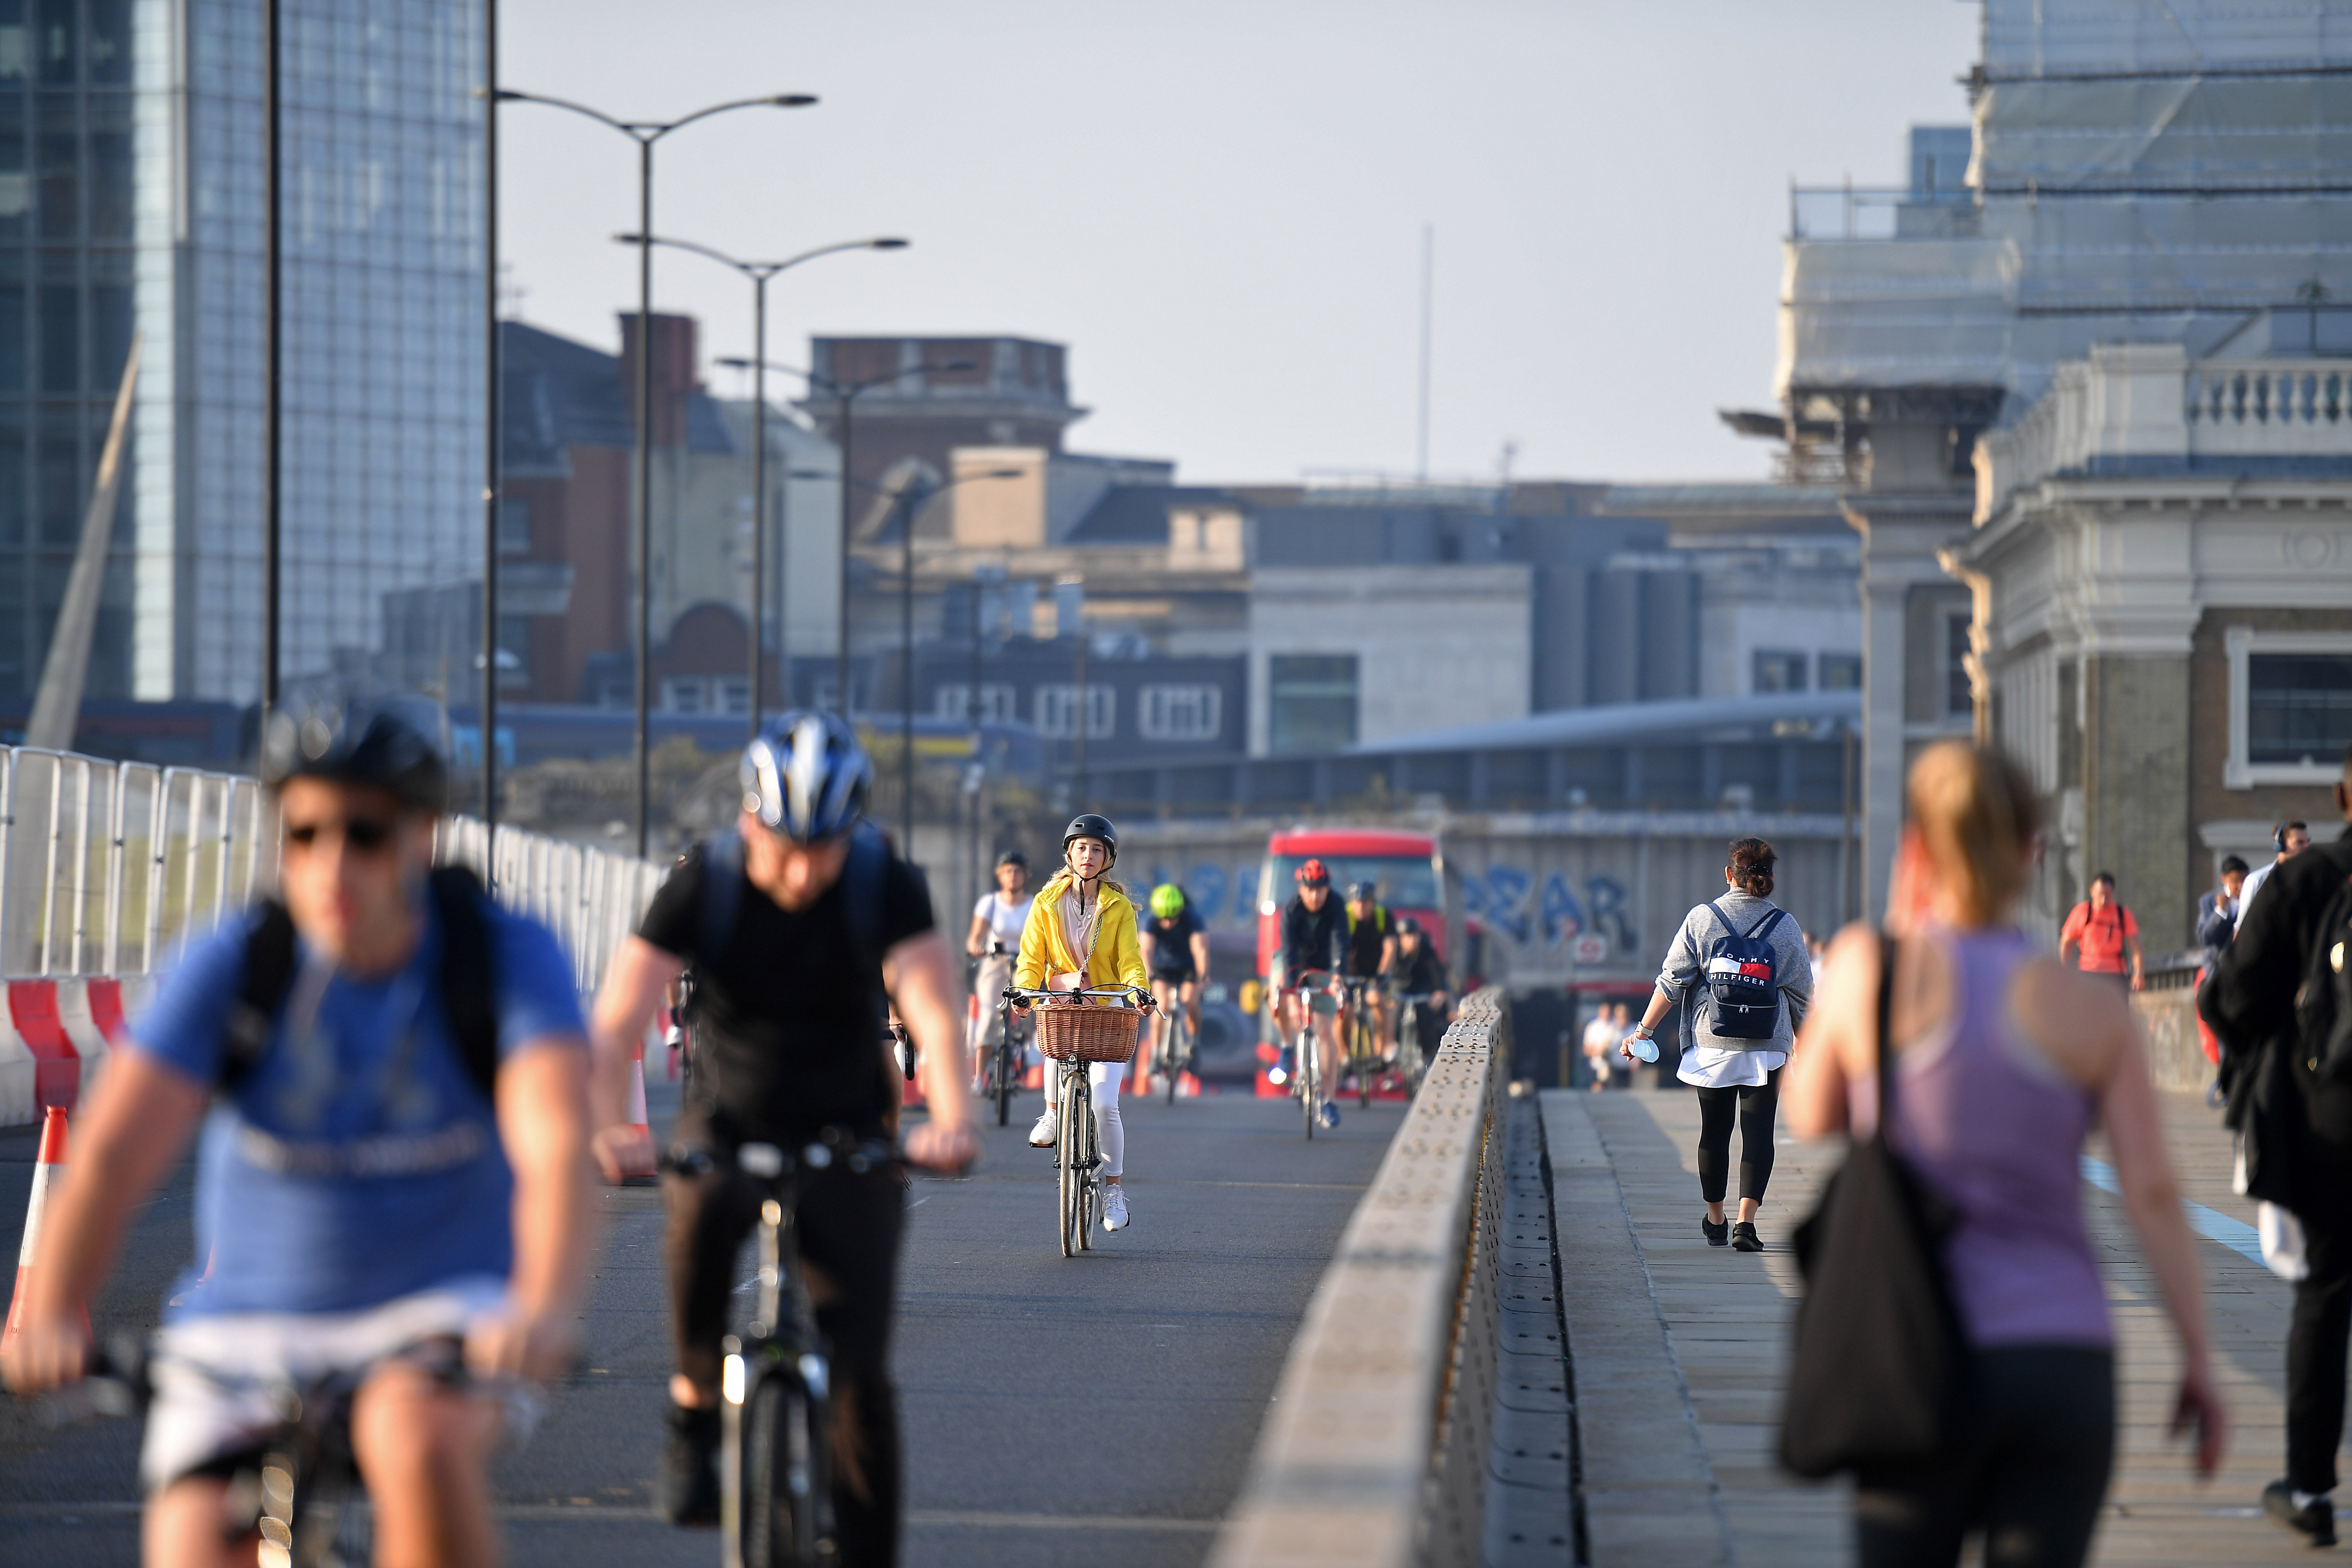 The IPPR recommends that town and city centres aim to be car-free by 2030, reallocating road space for walking and cycling